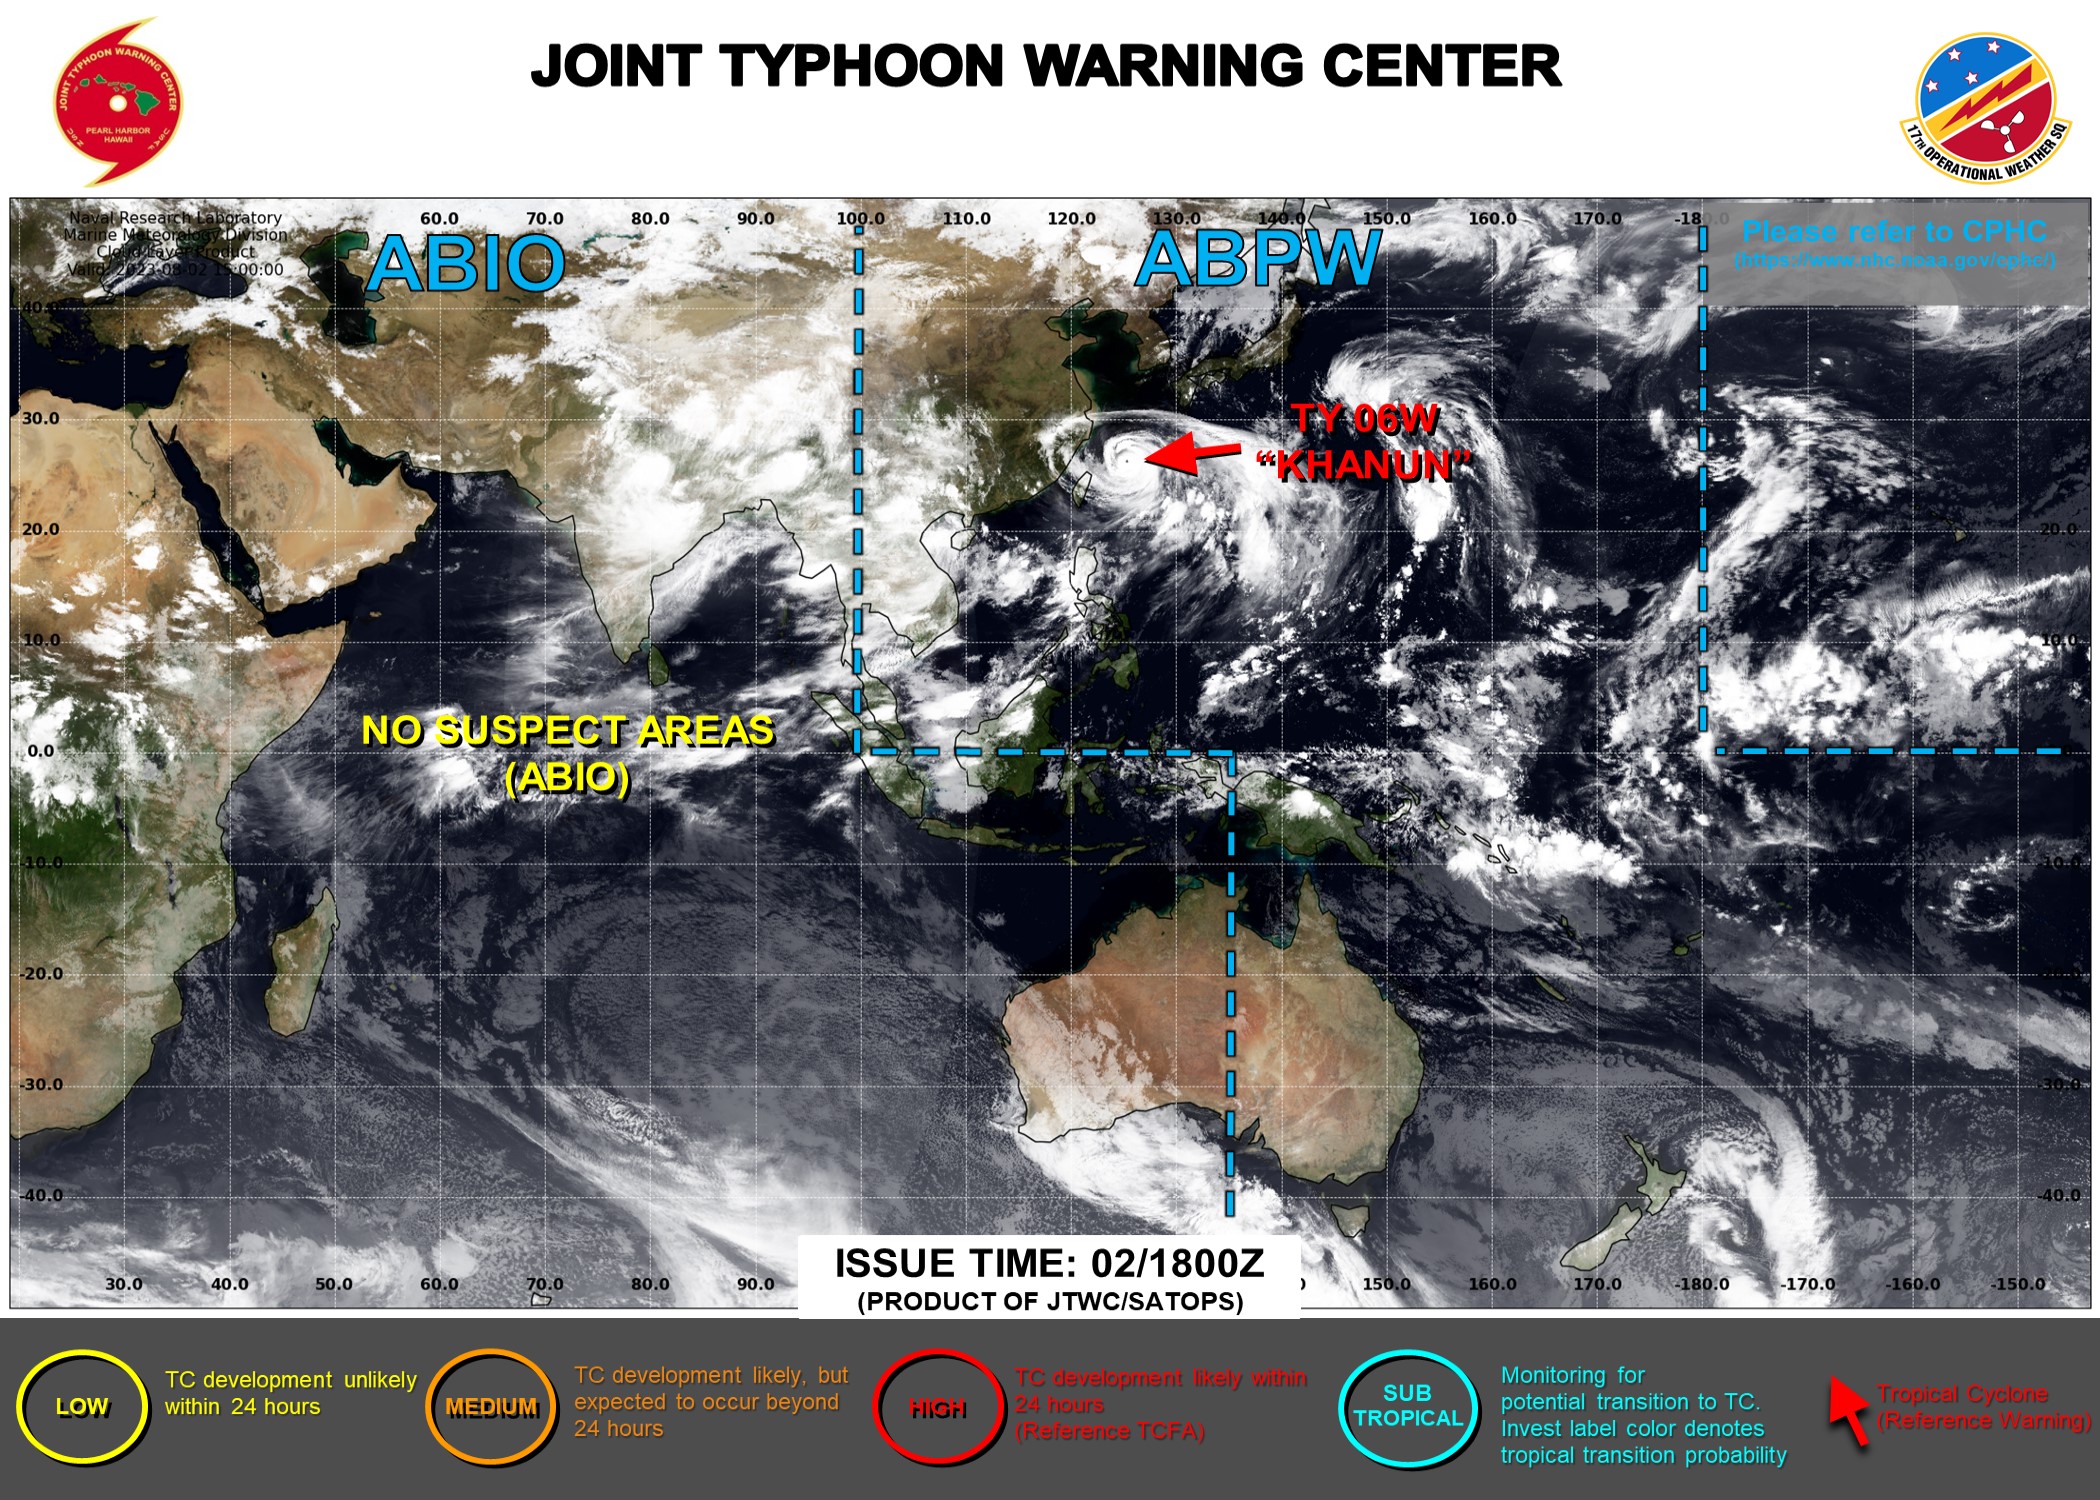 JTWC IS ISSUING 6HOURLY WARNINGS AND 3HOURLY SATELLITE BULLETINS TY 06W(KHANUN).